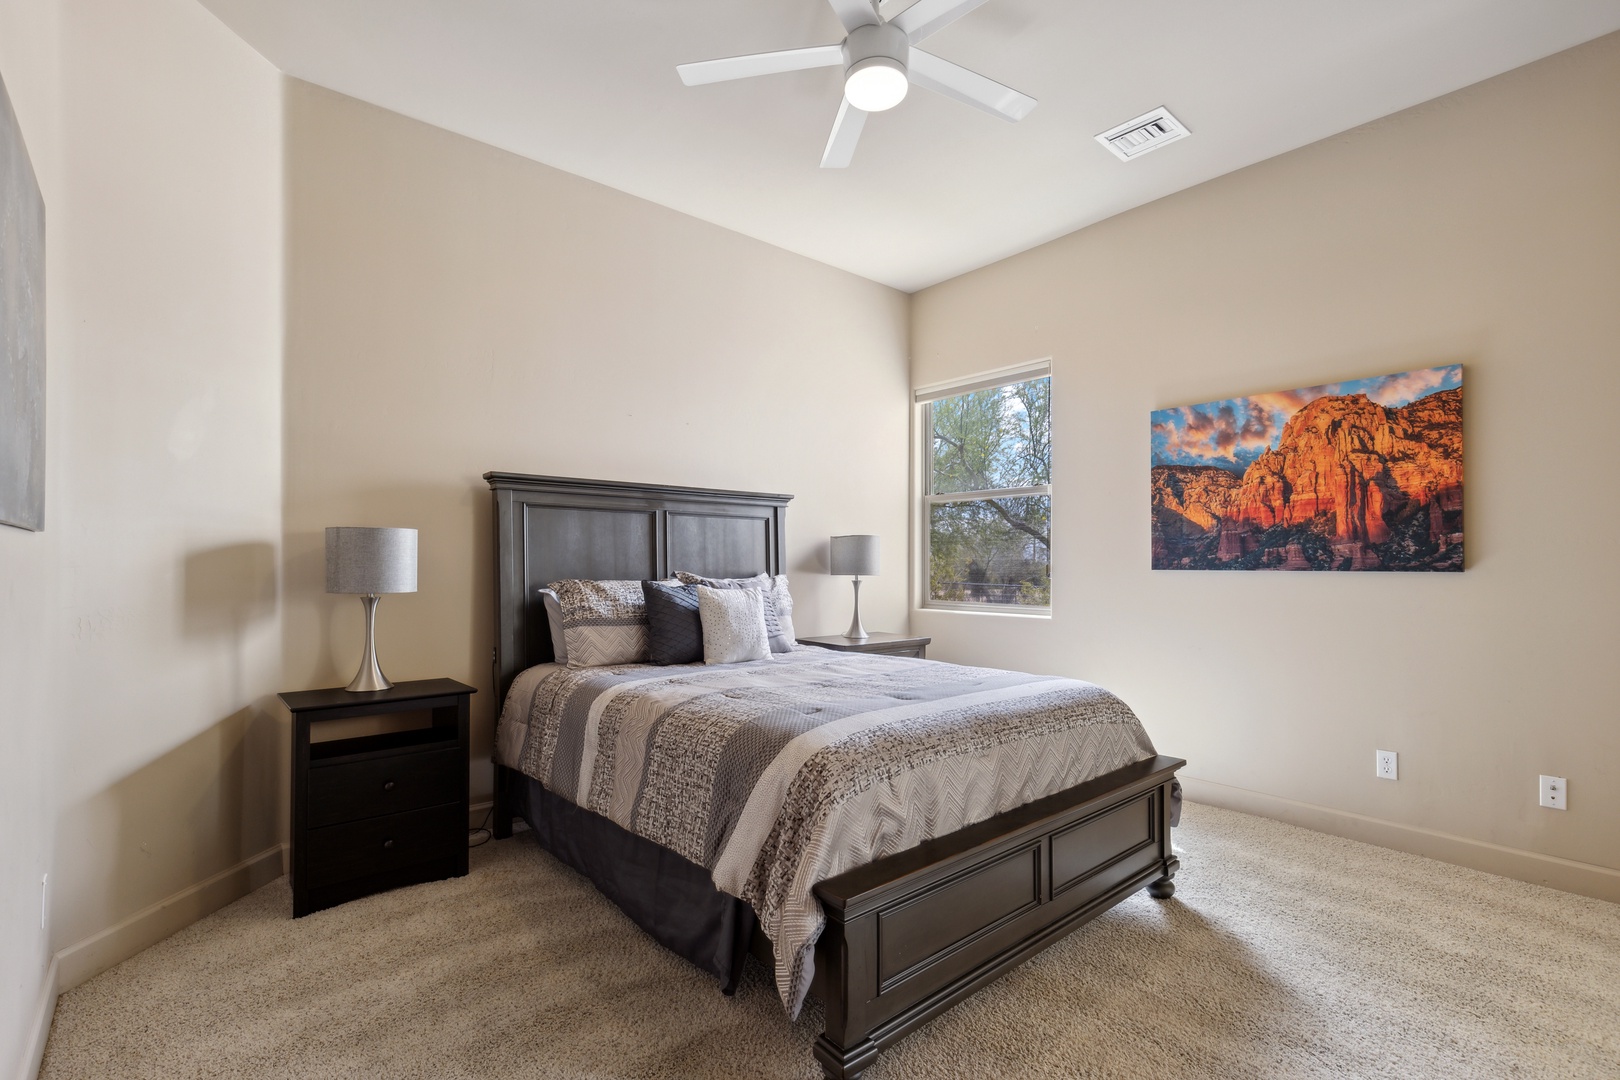 This spacious bedroom offers a queen bed